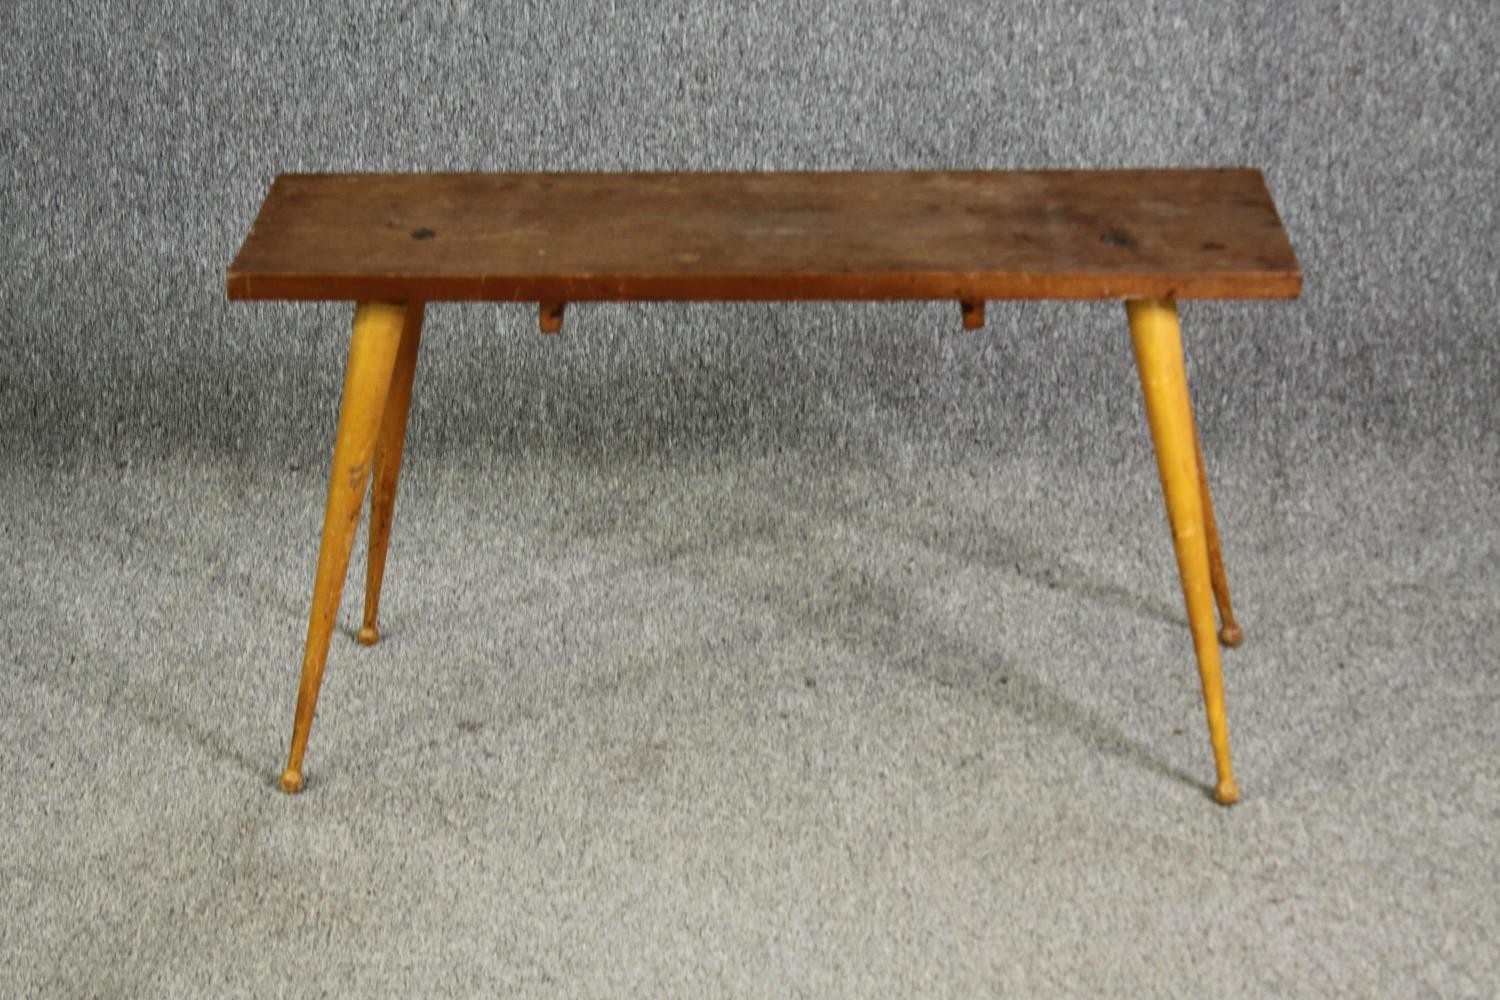 An Ercol style beech side table, with associated top and base. H.49 W.90 D.29.5cm.